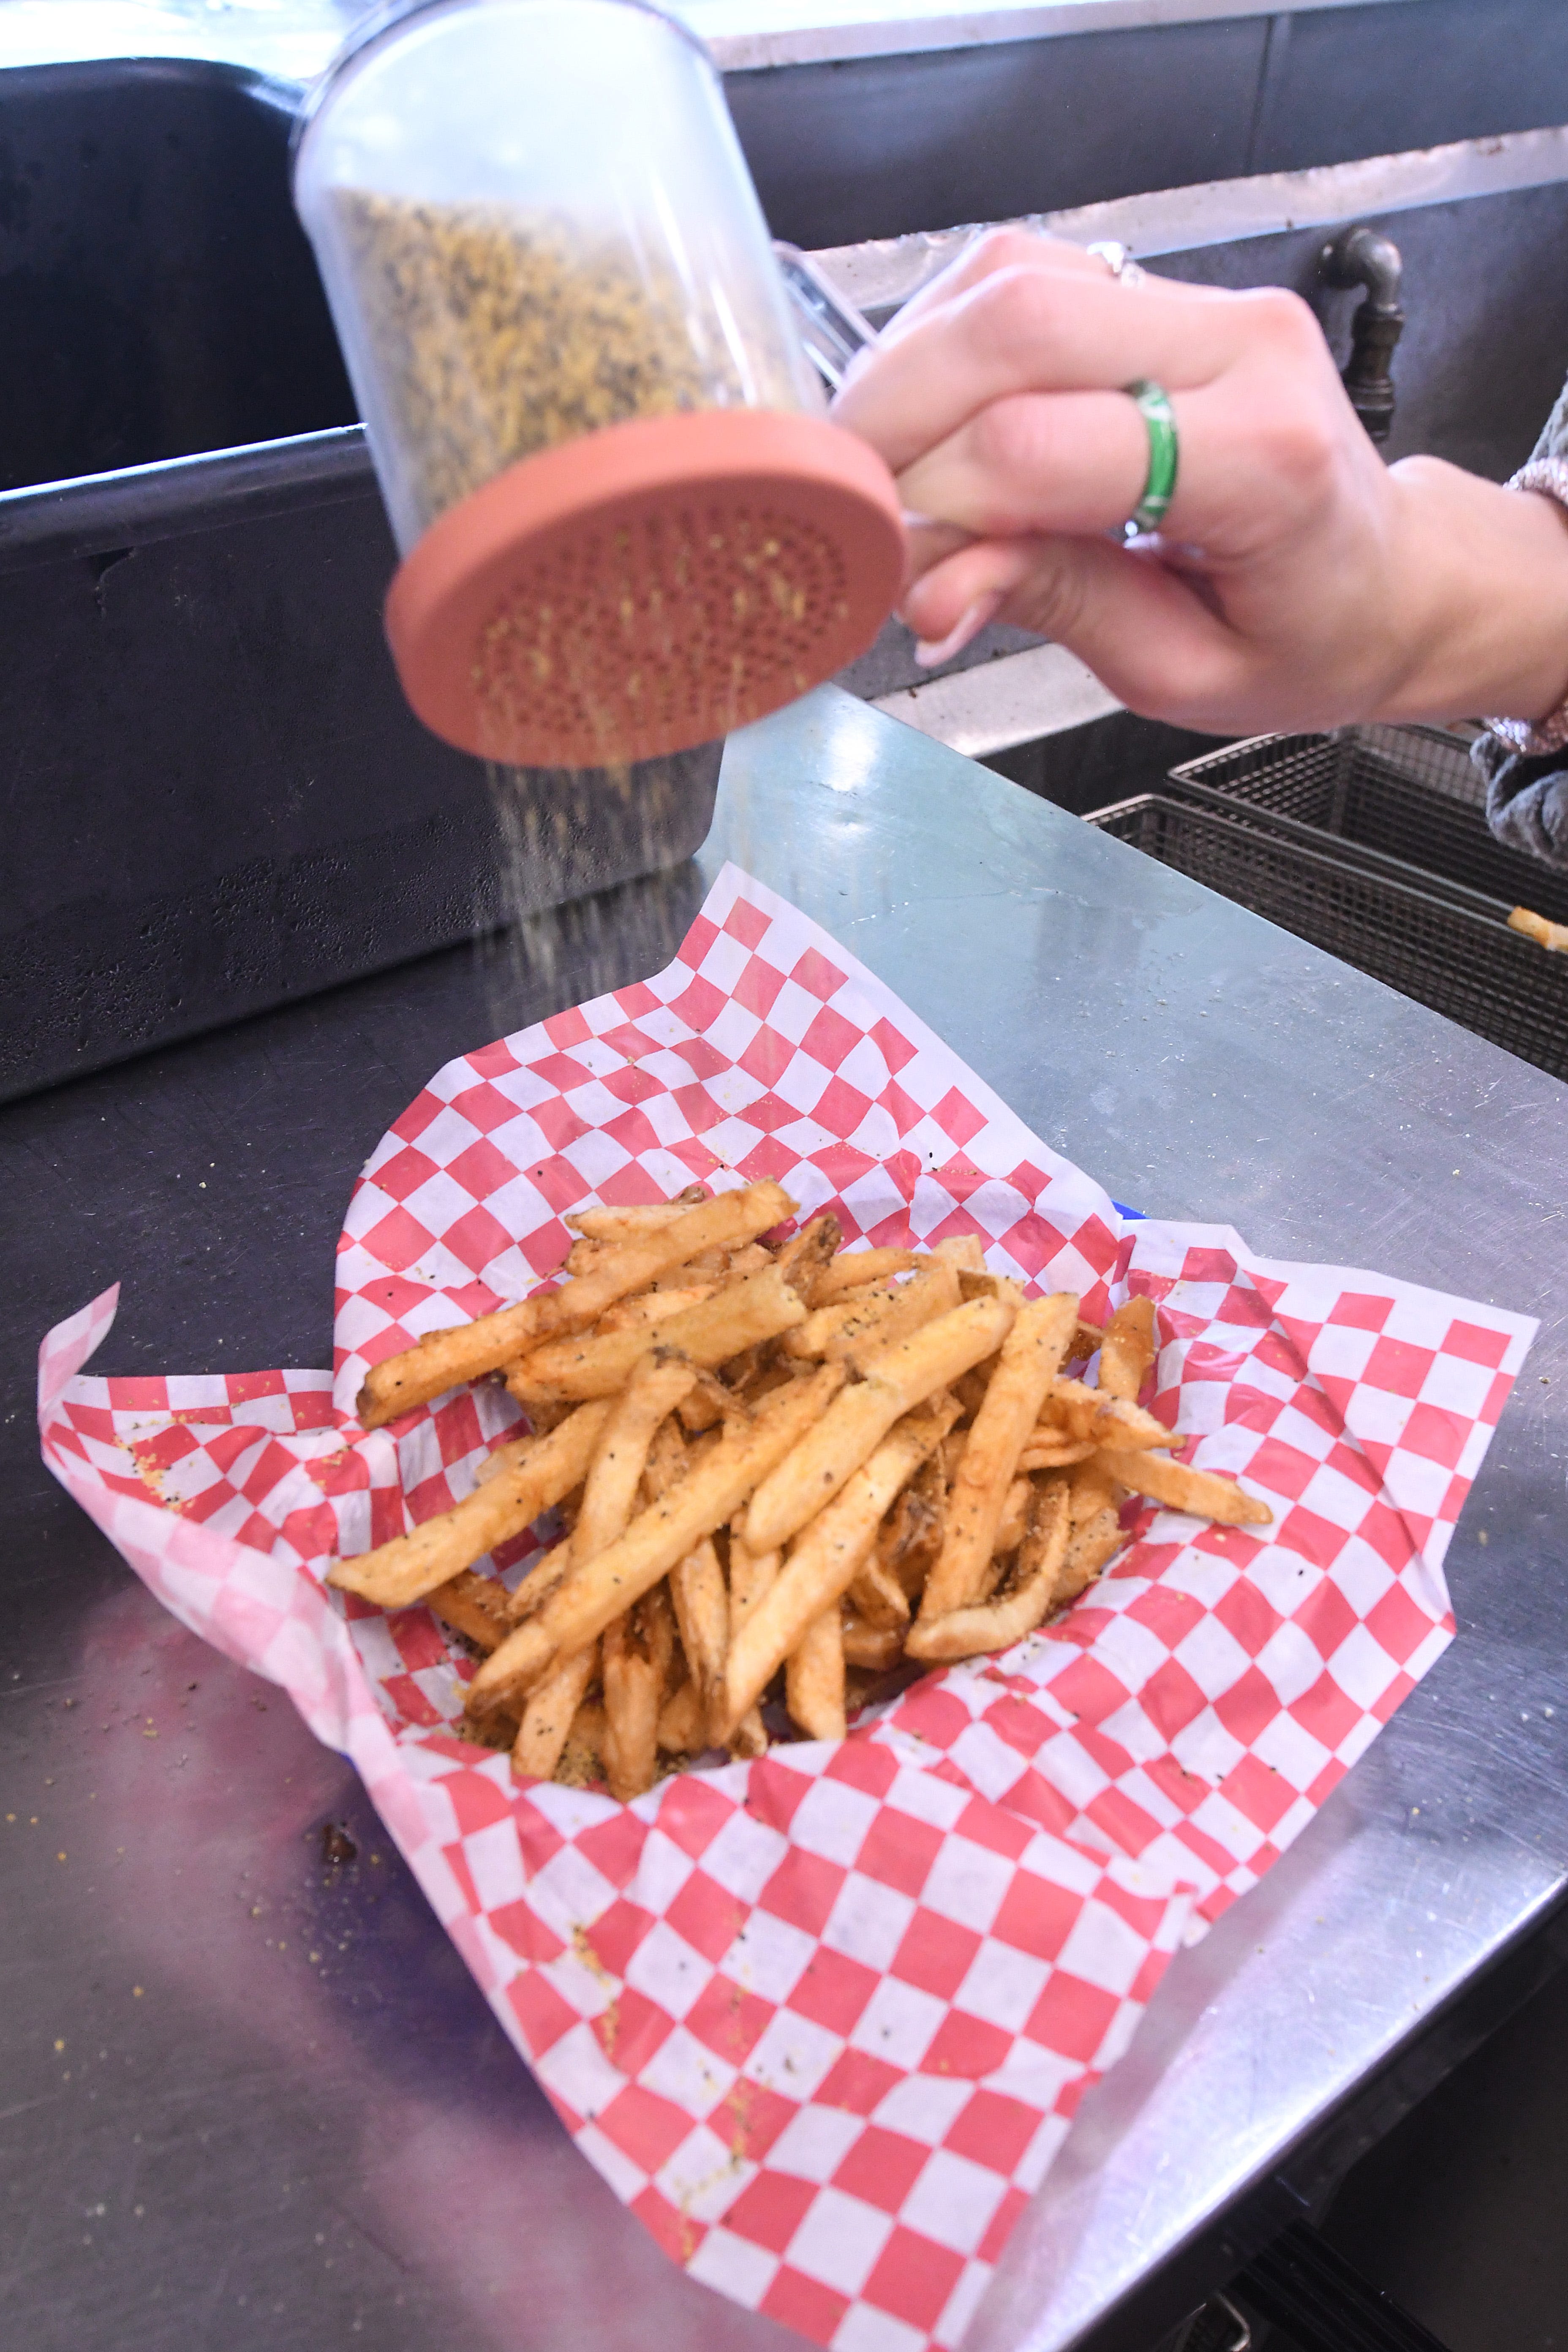 Port City Foodies Newsletter: Best fries, great wine and new beers